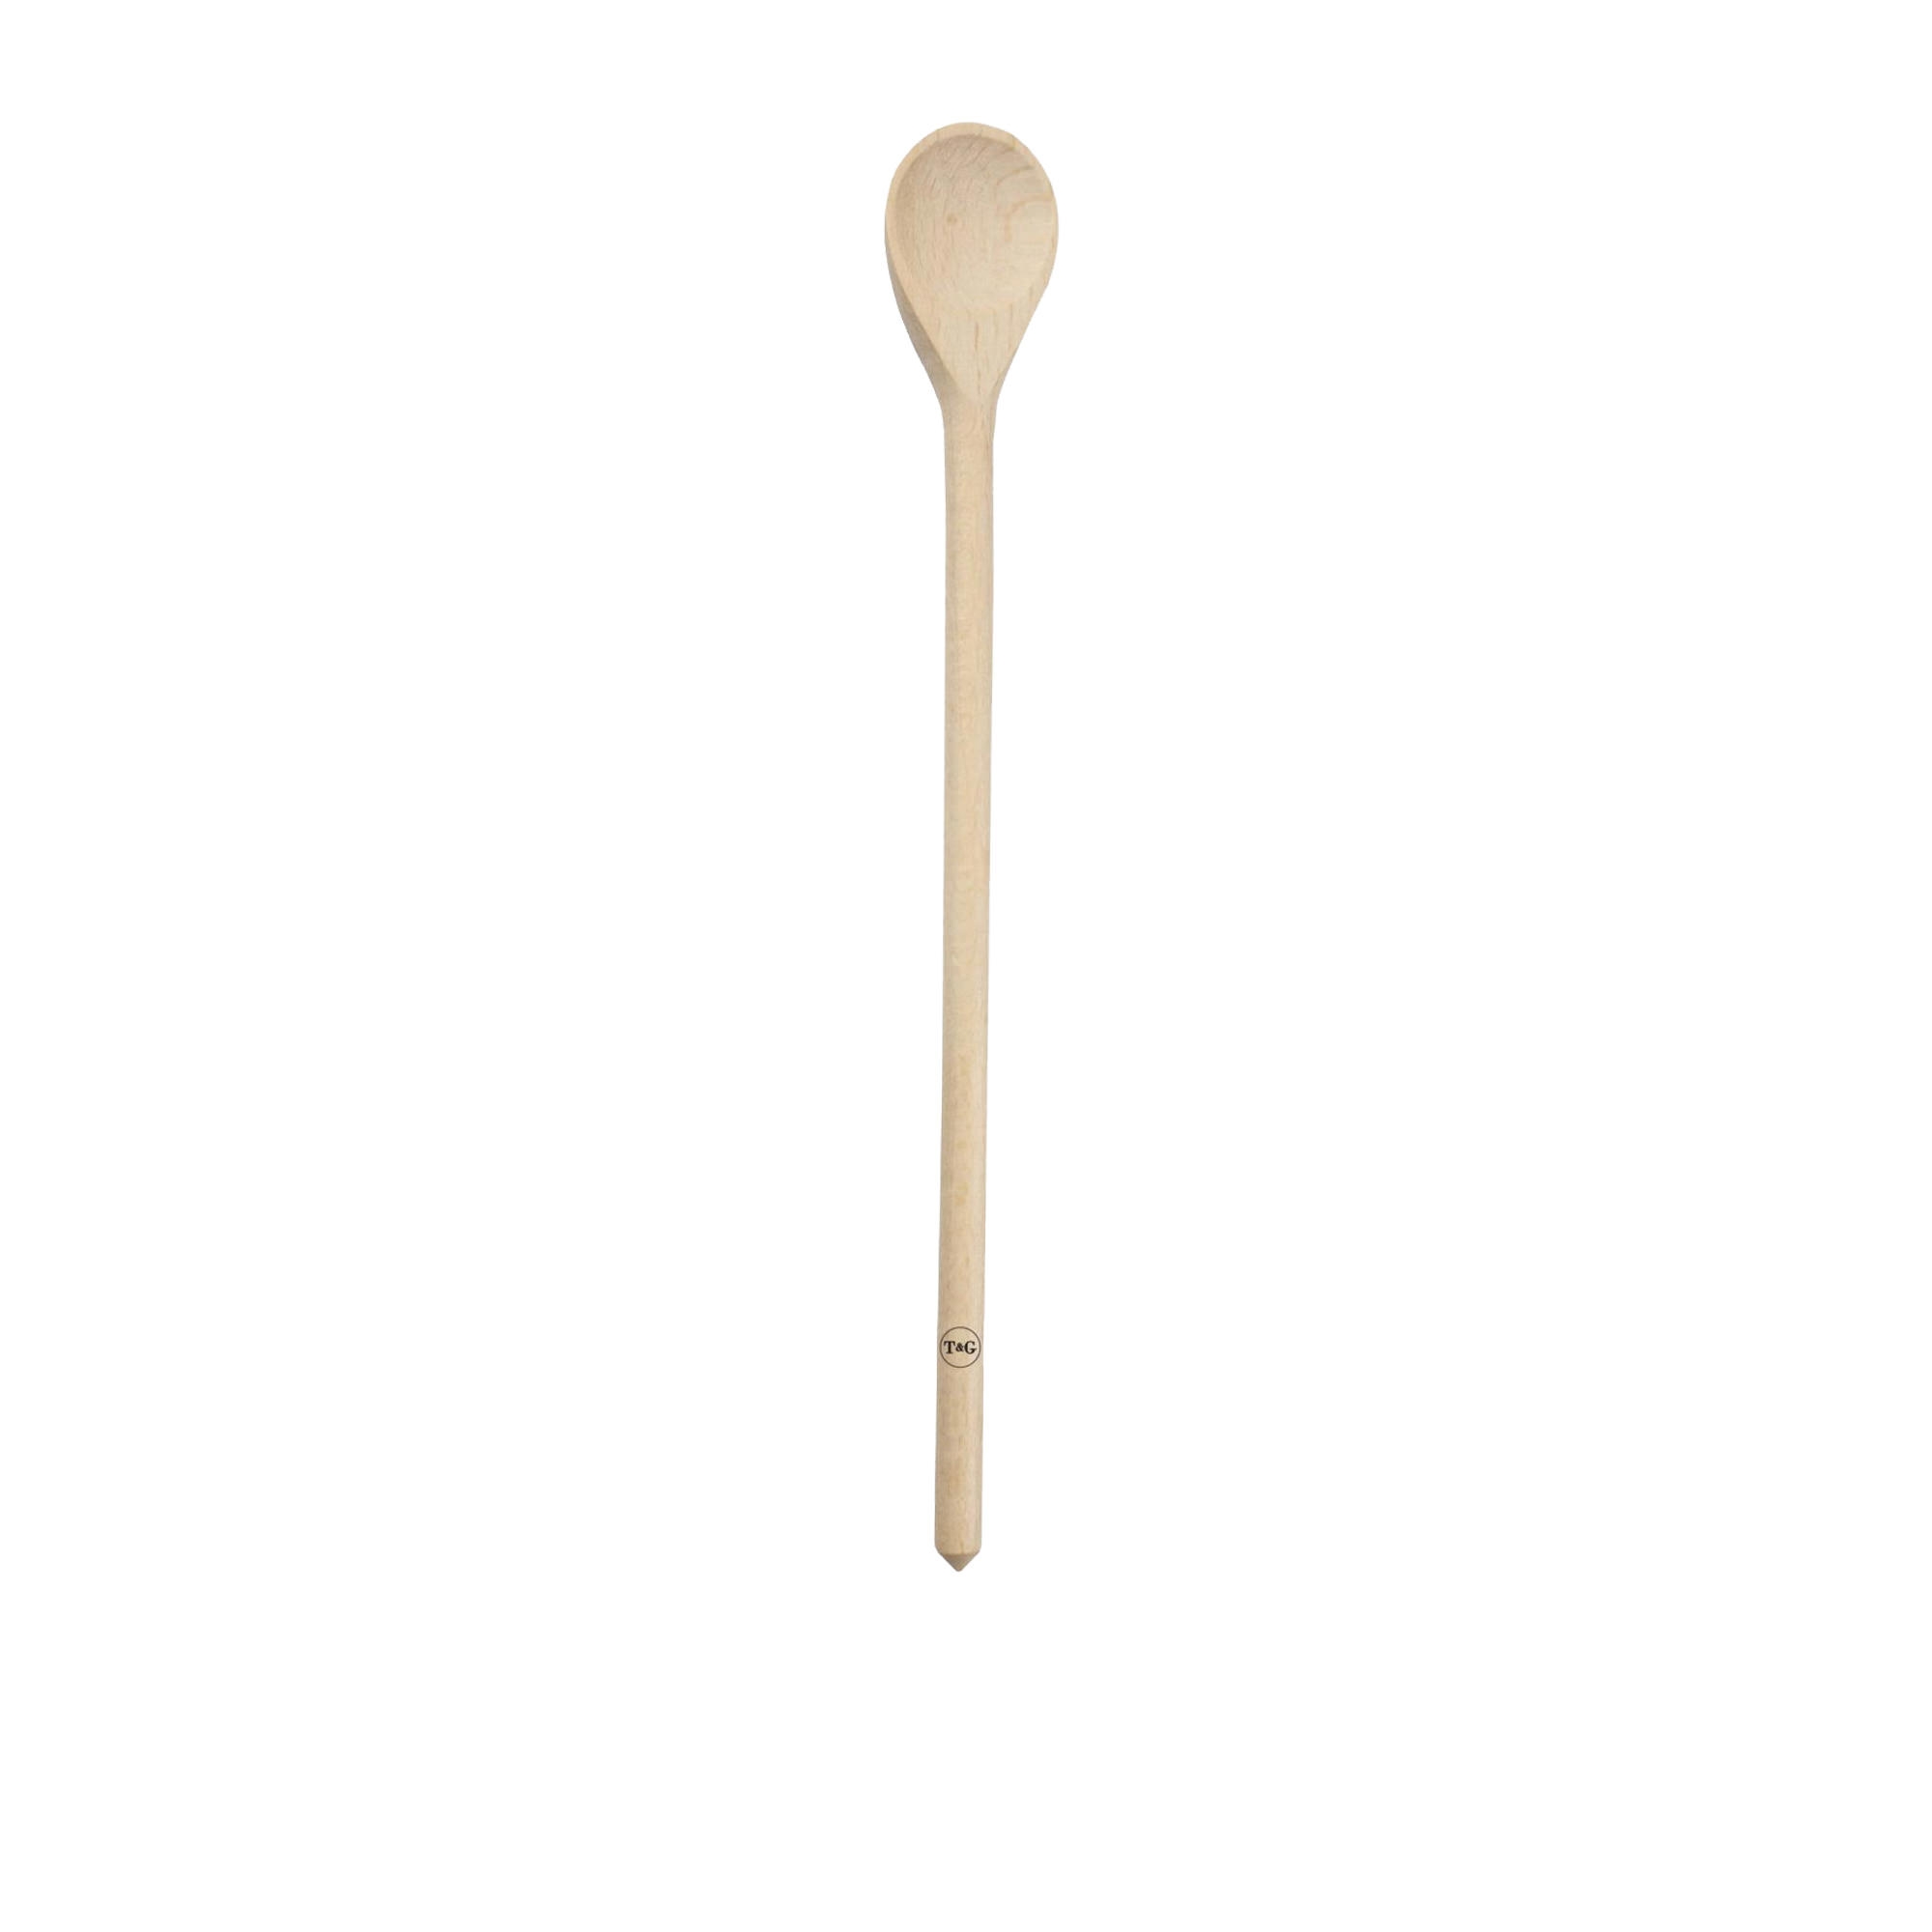 Wild Wood Wooden Cafetiere Spoon 20cm Image 2